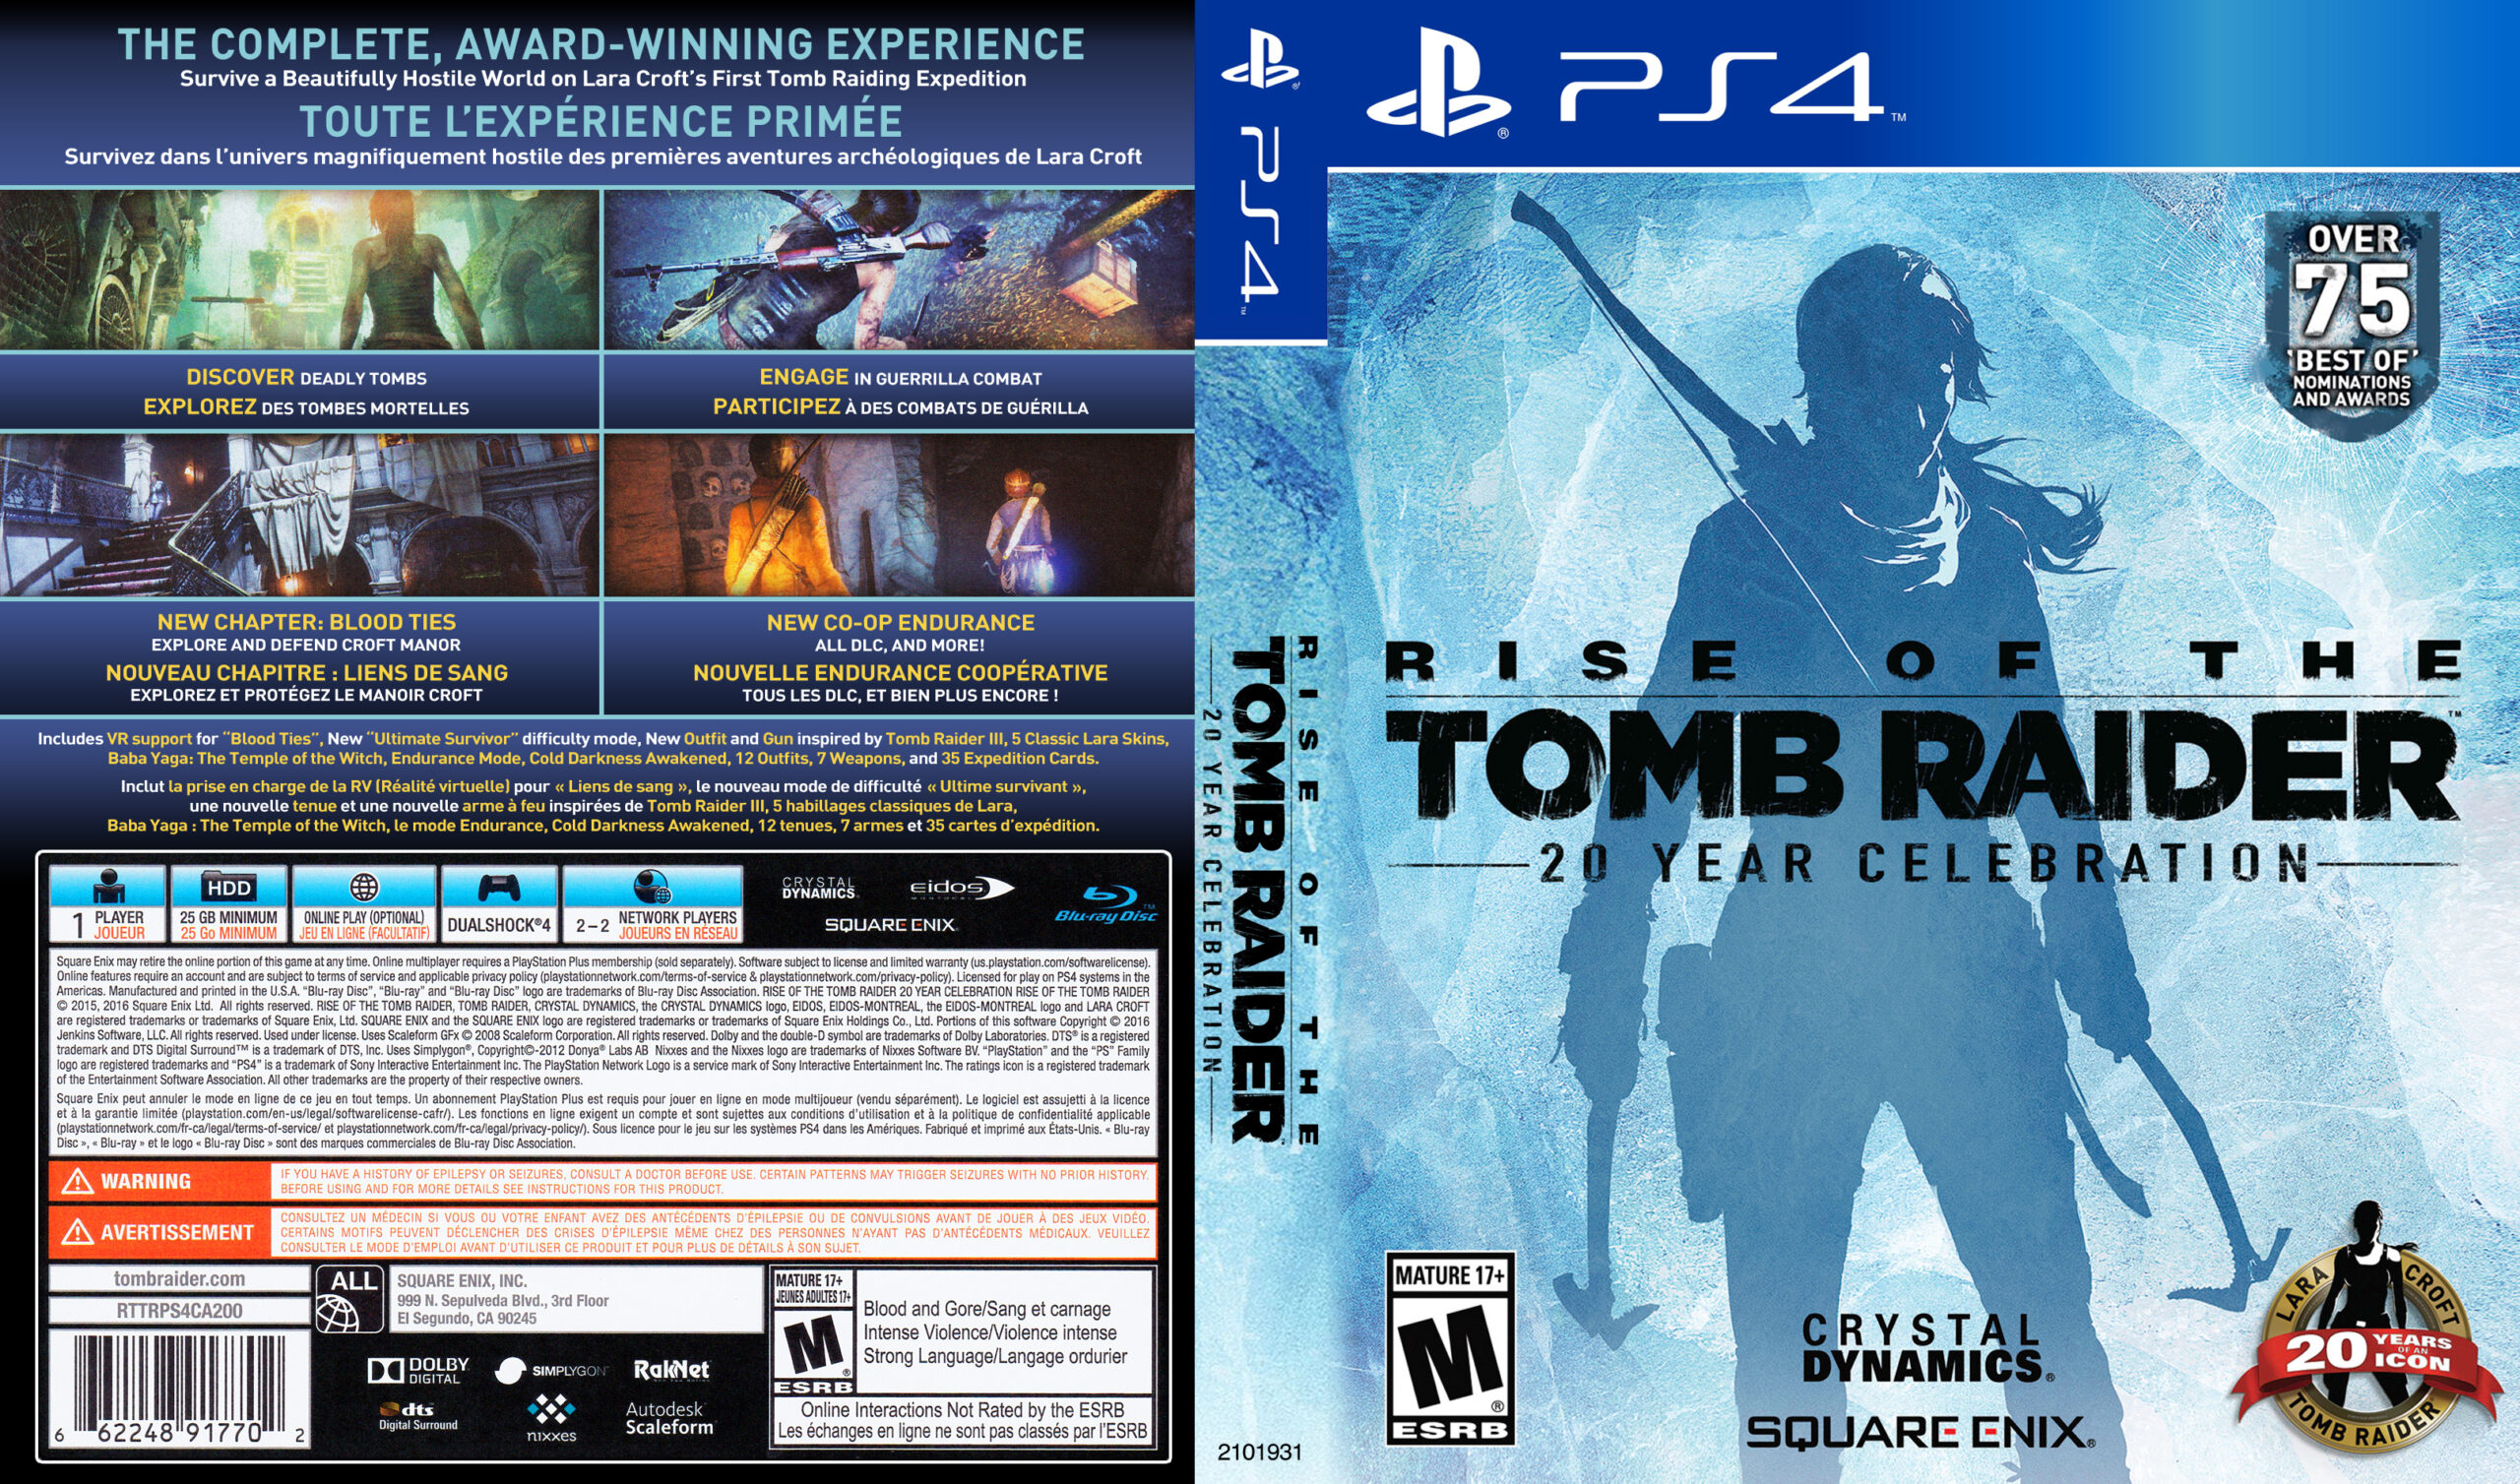 Rise of the Tomb Raider 20 Year Celebration CUSA05794 PS4 PKG auctor